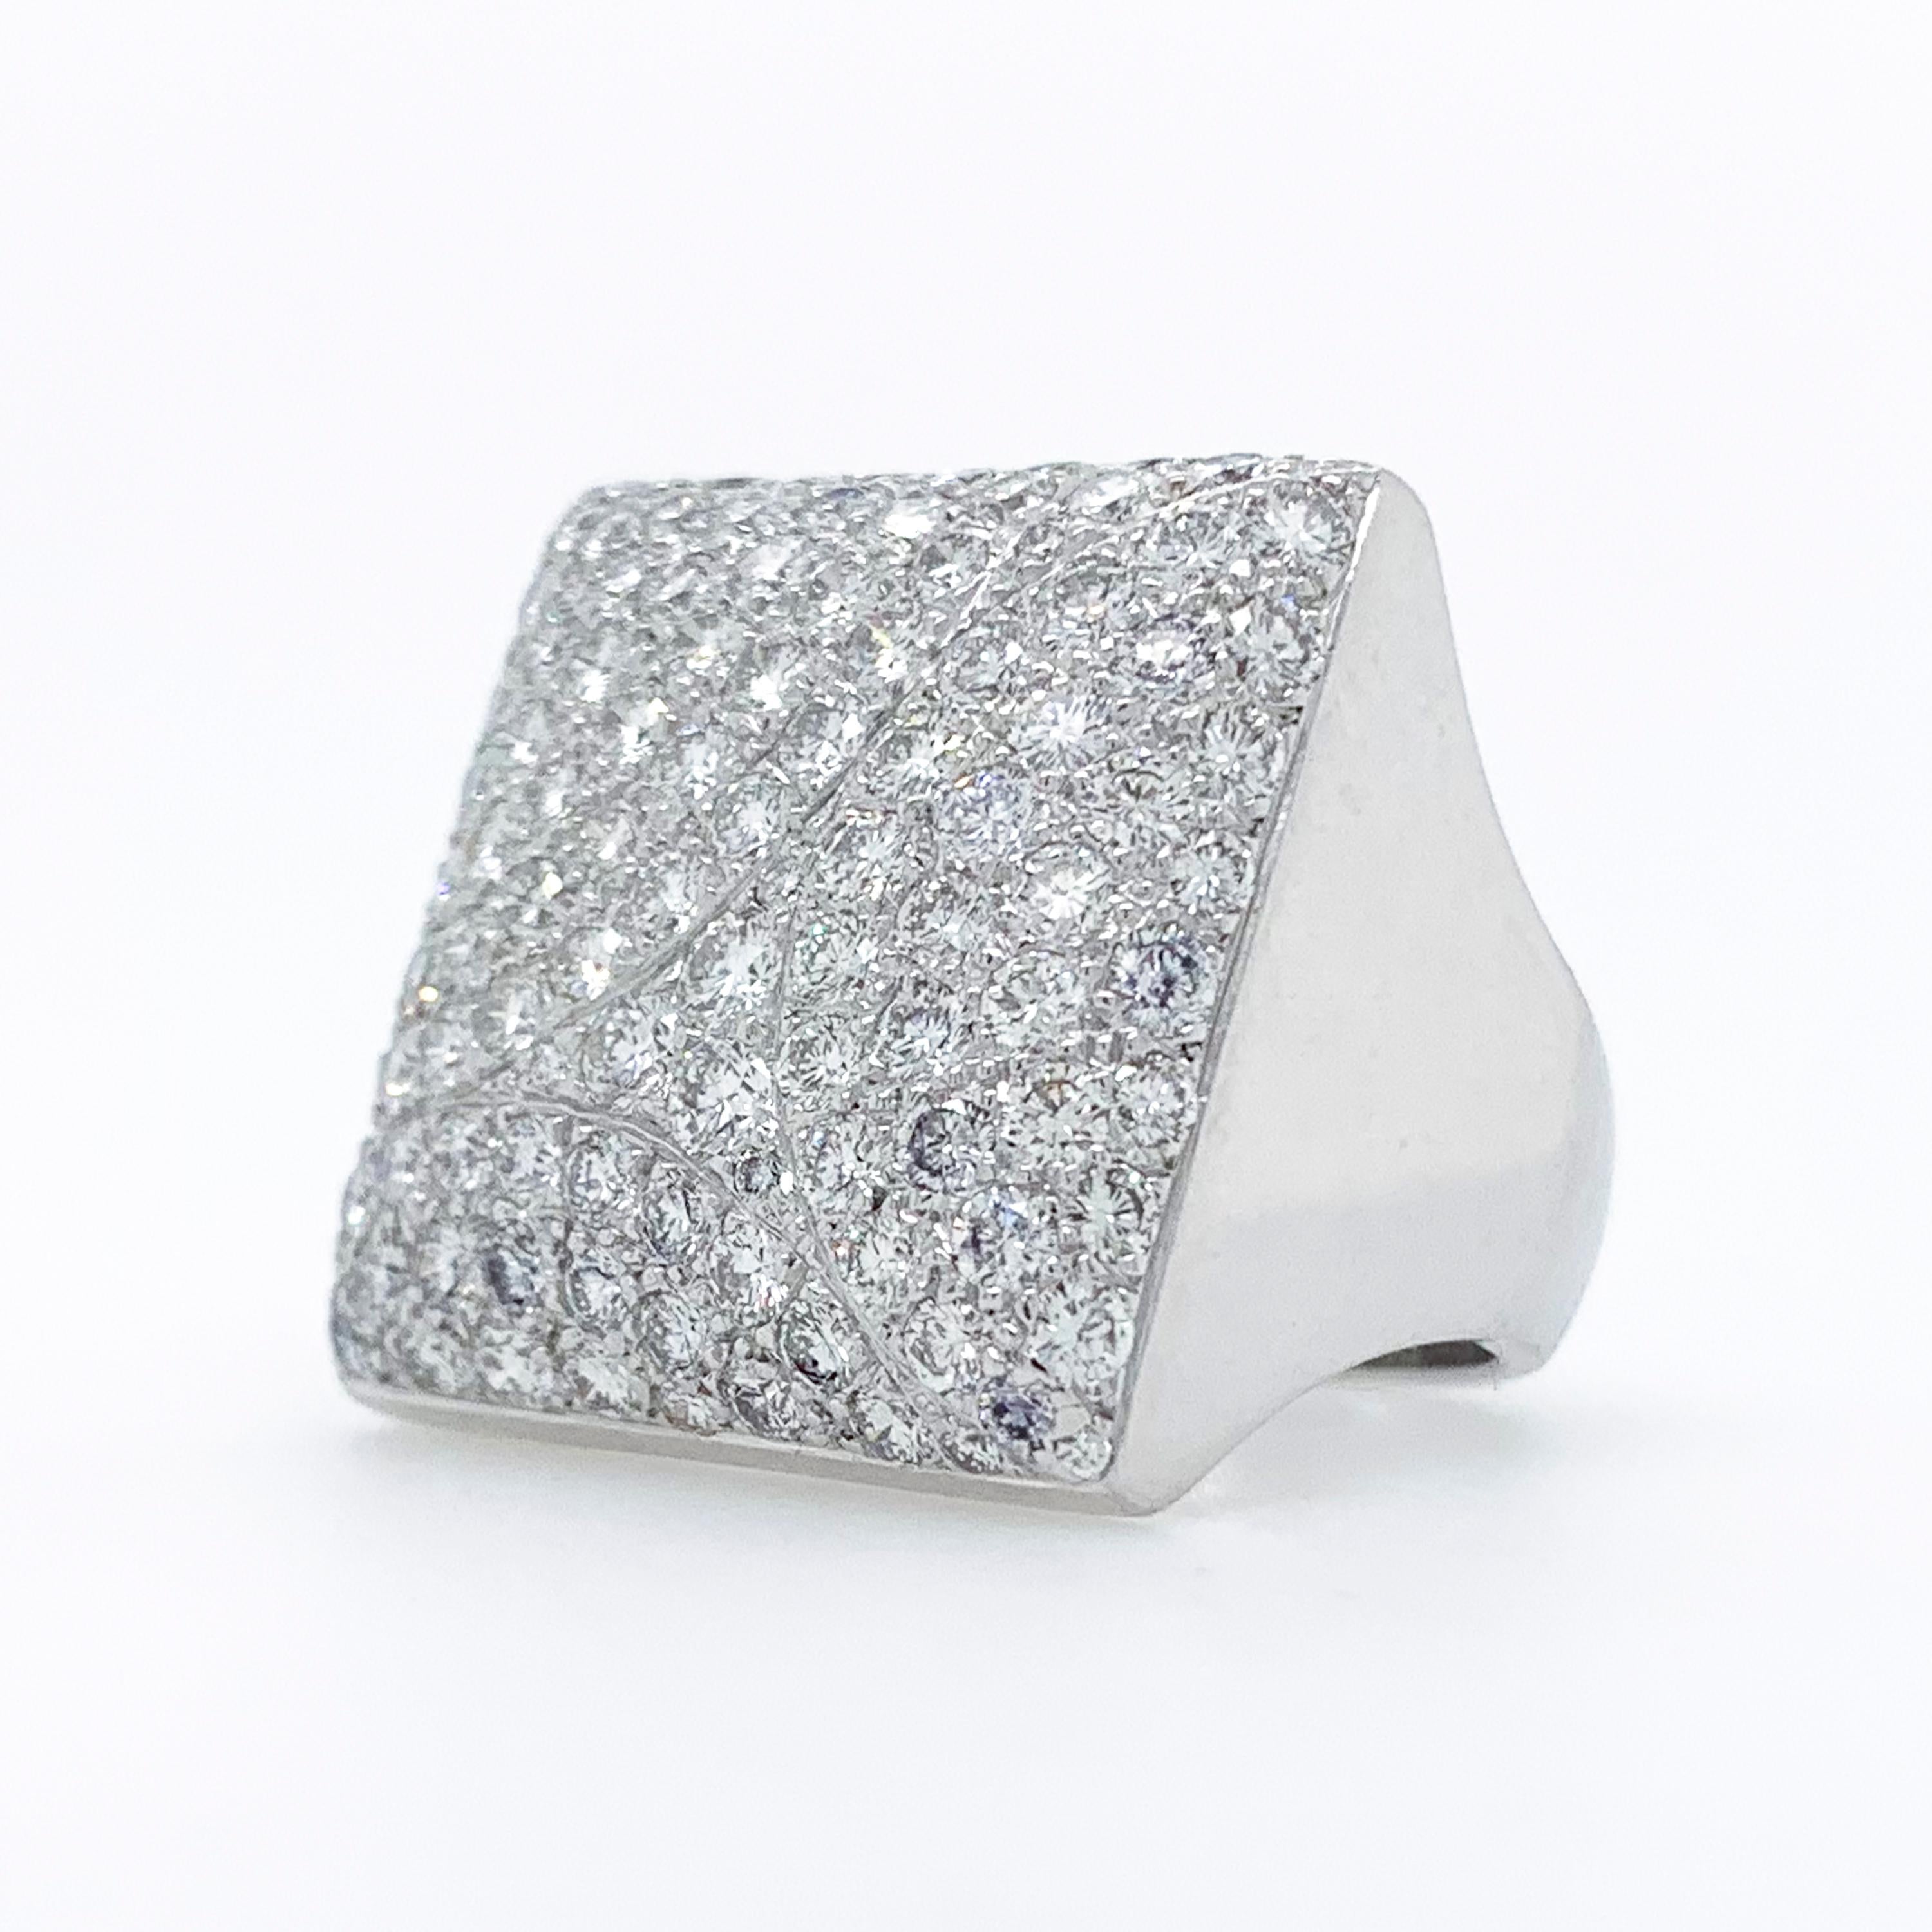 Cartier Berlingot pave diamond dome ring in 18k white gold. 

This ring features 117 pave set round brilliant cut diamonds totaling approximately 3.00 carats with E-F color and VS clarity.  The square top of this ring measures approximately 20mm x